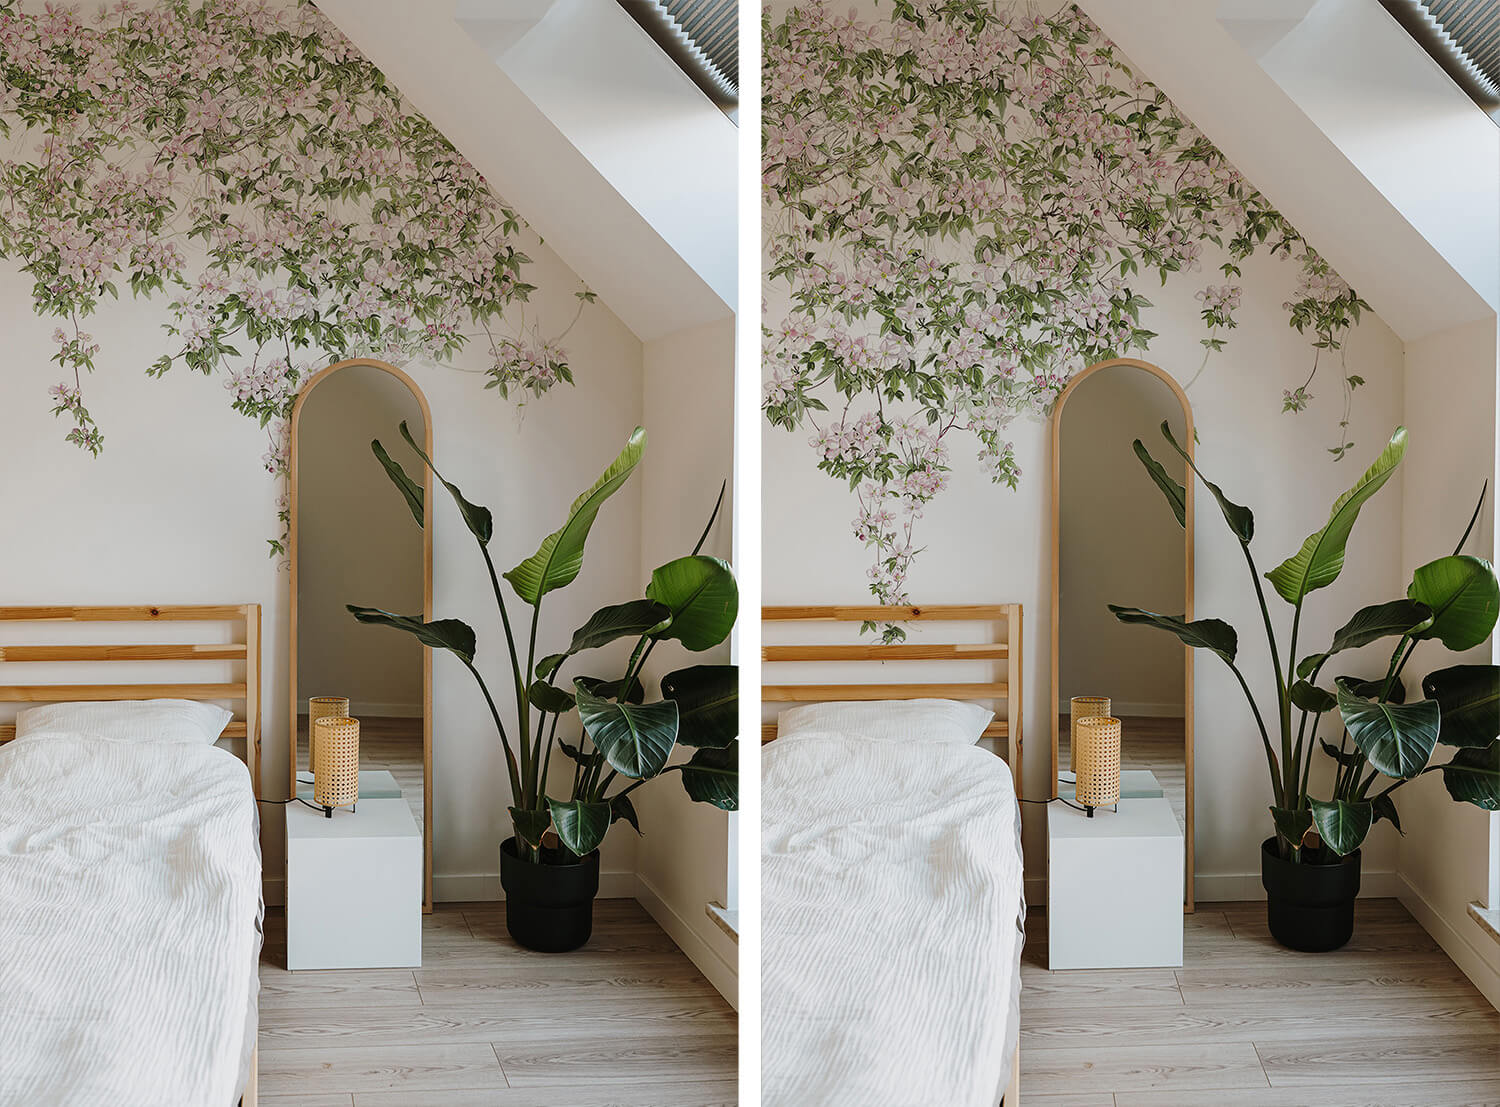 Flowers hanging mural in different custom sizes